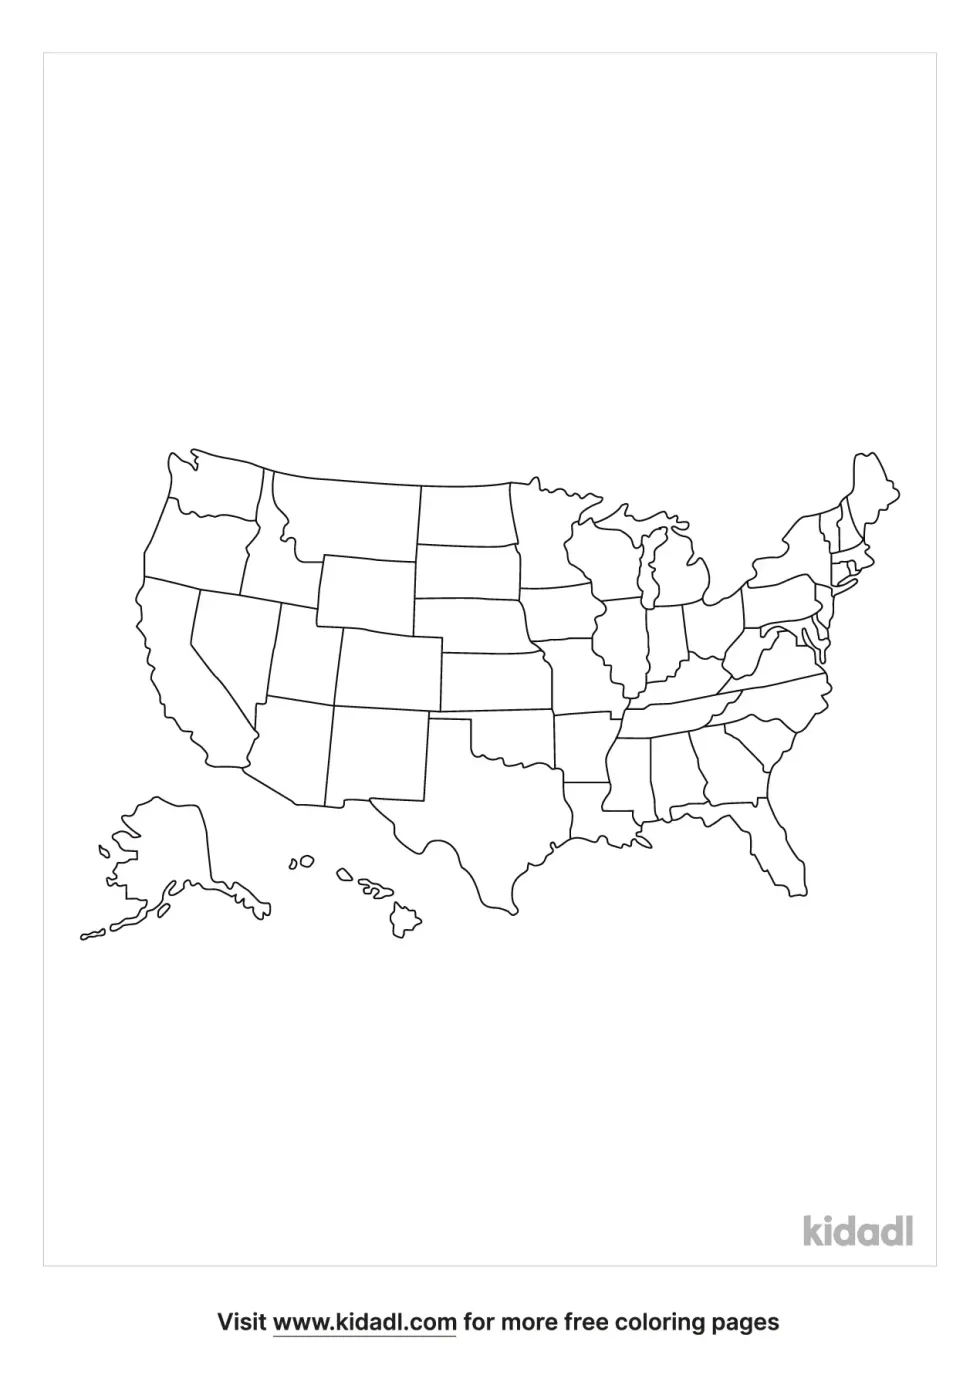 The 5 Regions Of The United States